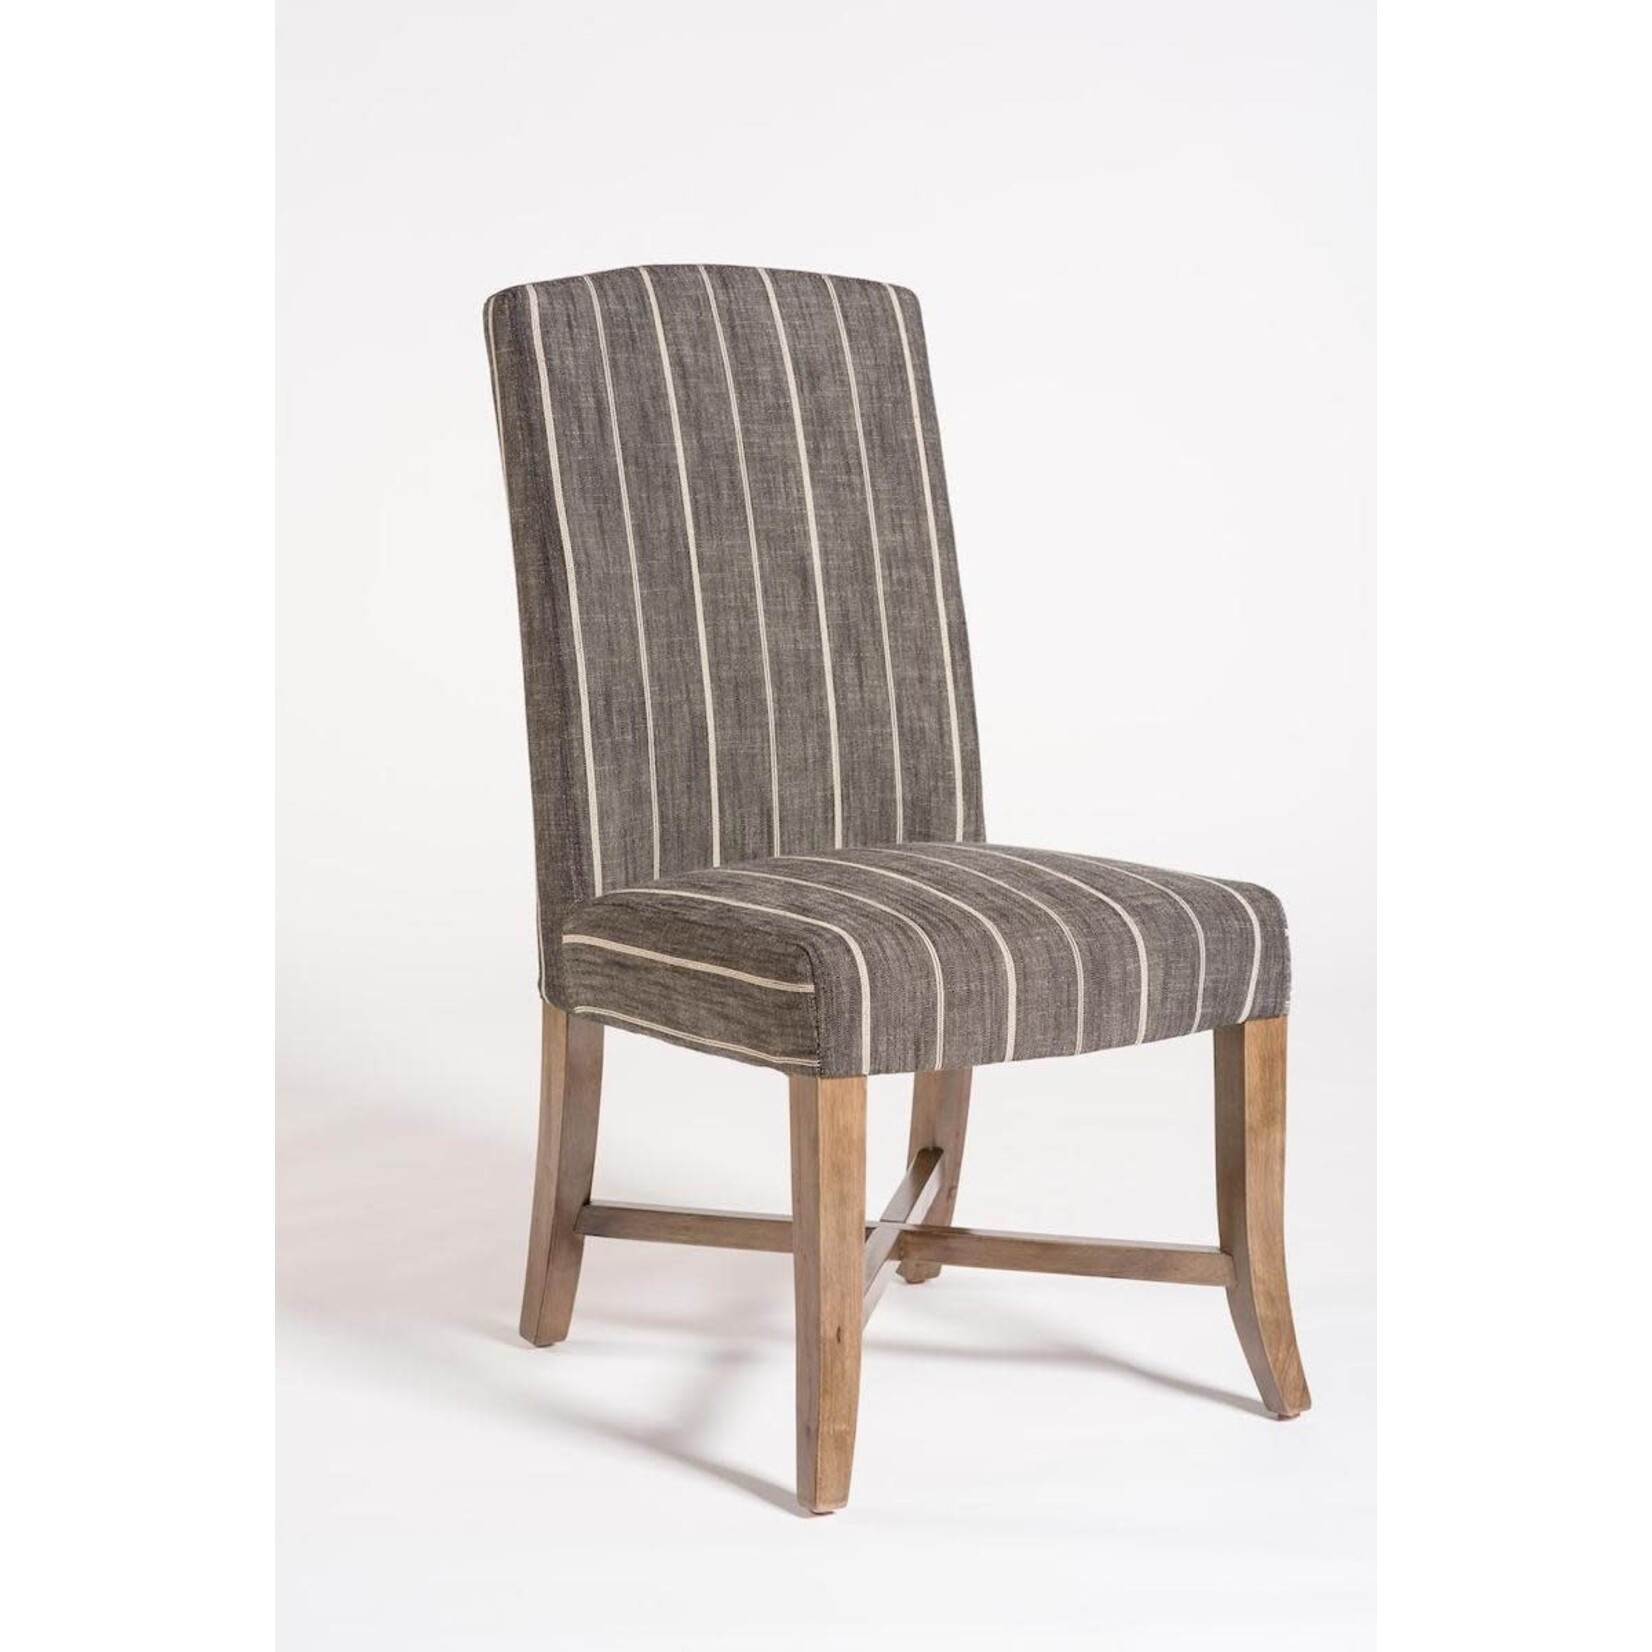 Mickler & Co. Marc Dining Chair